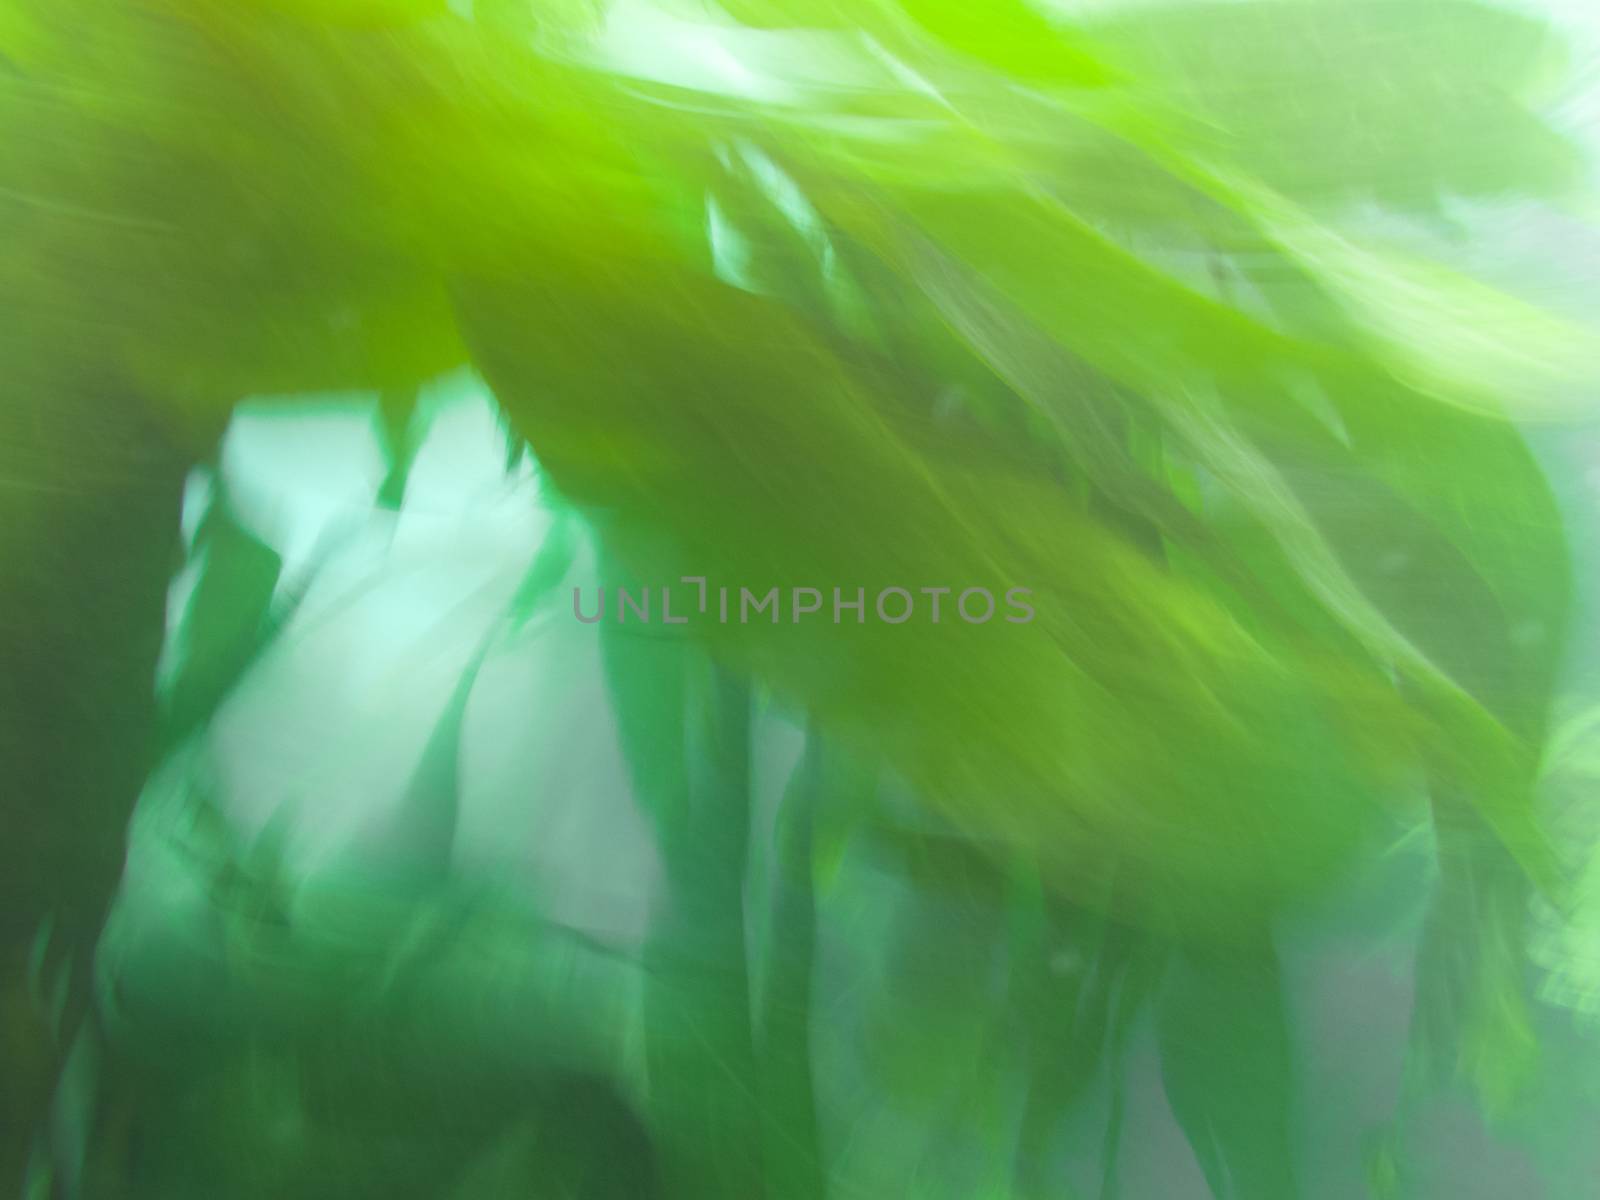 Green submerged aquatic plants underwater blurry nature abstract background texture pattern